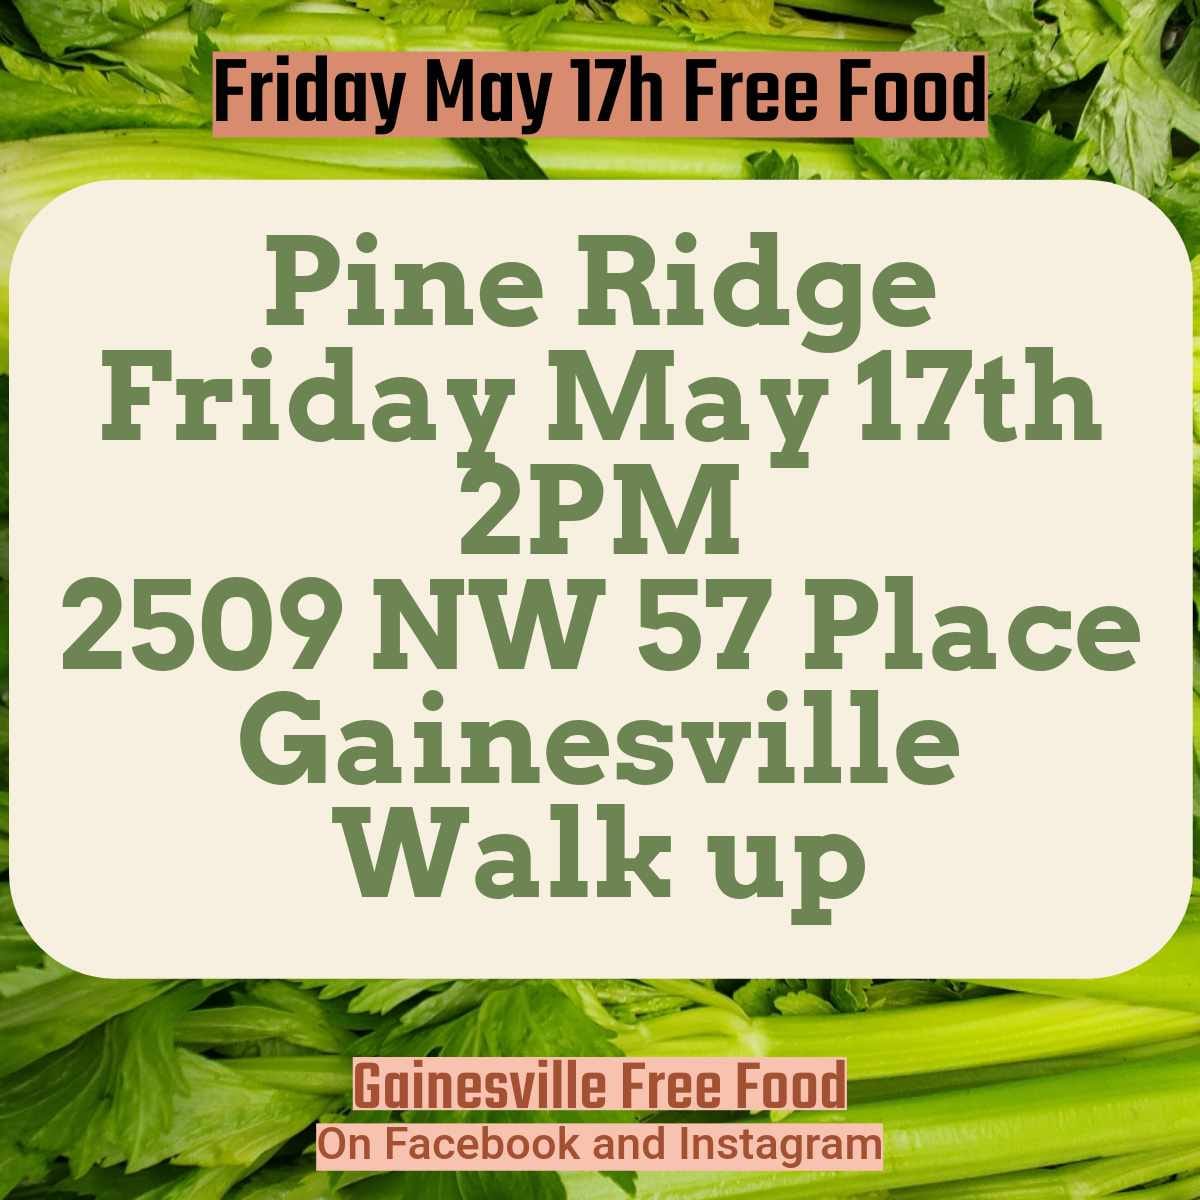 Pine Ridge Free Food Giveaway on Friday, May 17th at 2pm as listed by Gainesville Free Food #HelpingPeople #ChangingLives